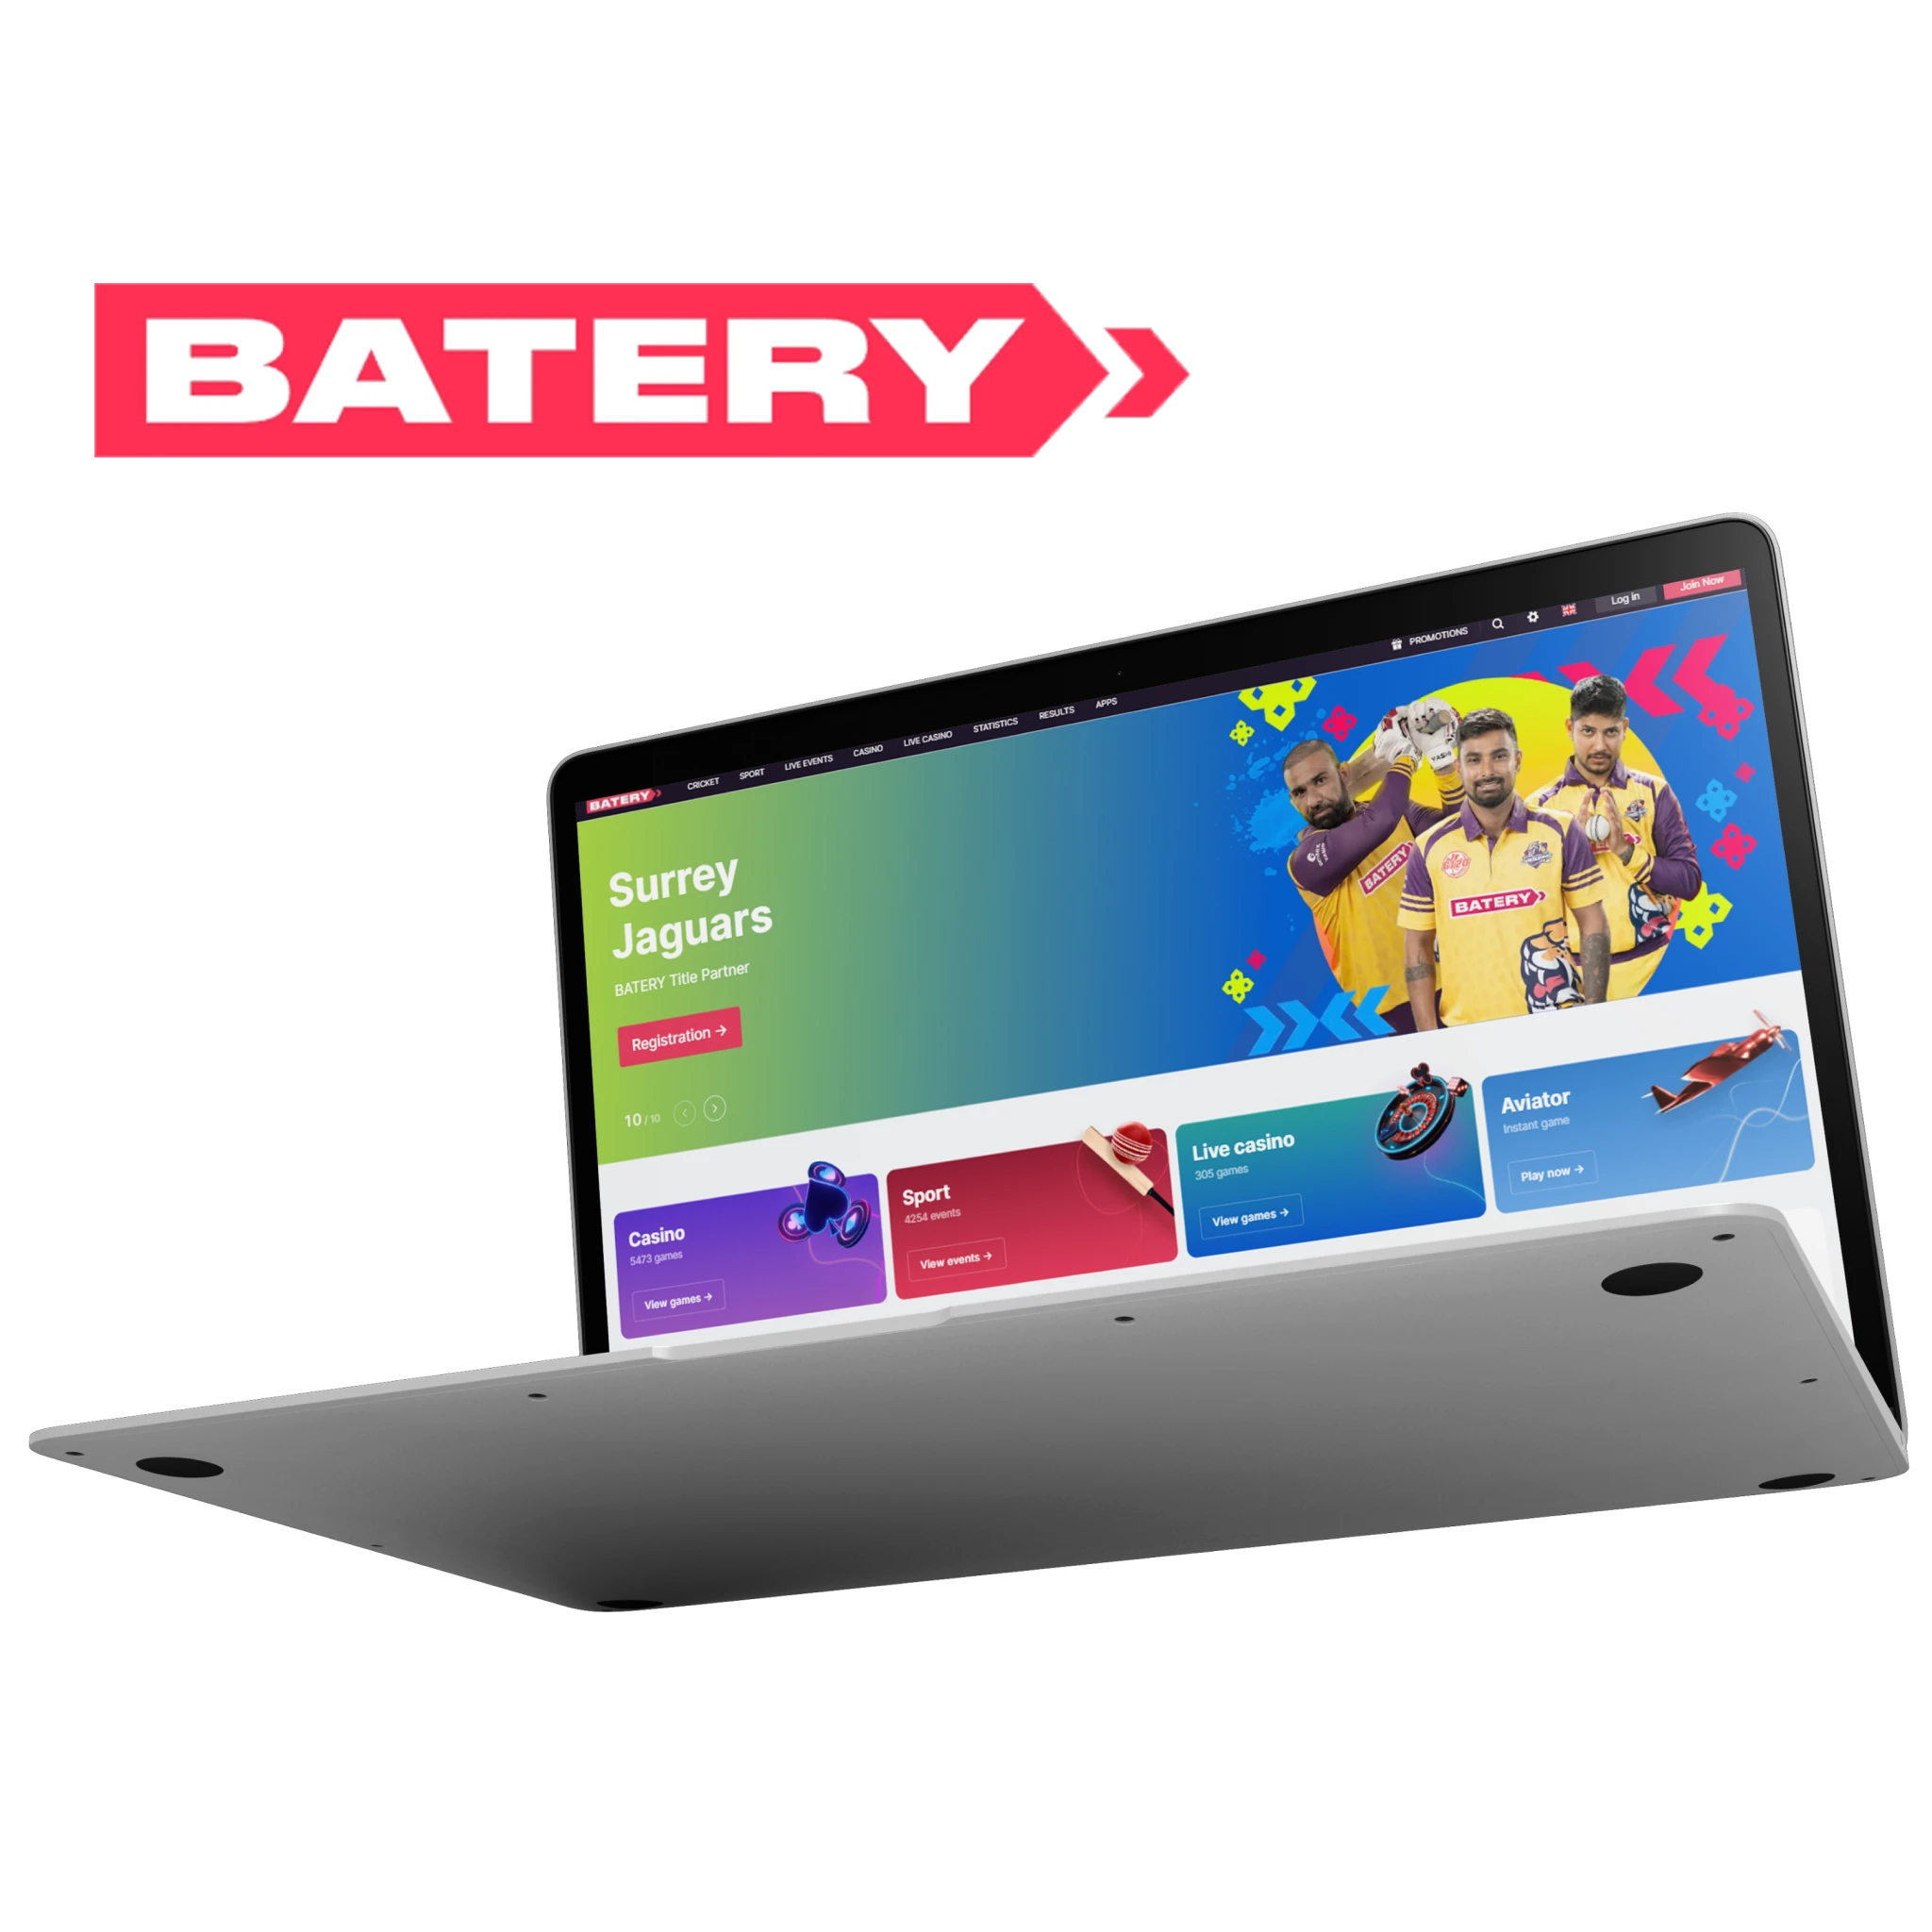 Join Batery now and have the most awesome online betting adventure ever!